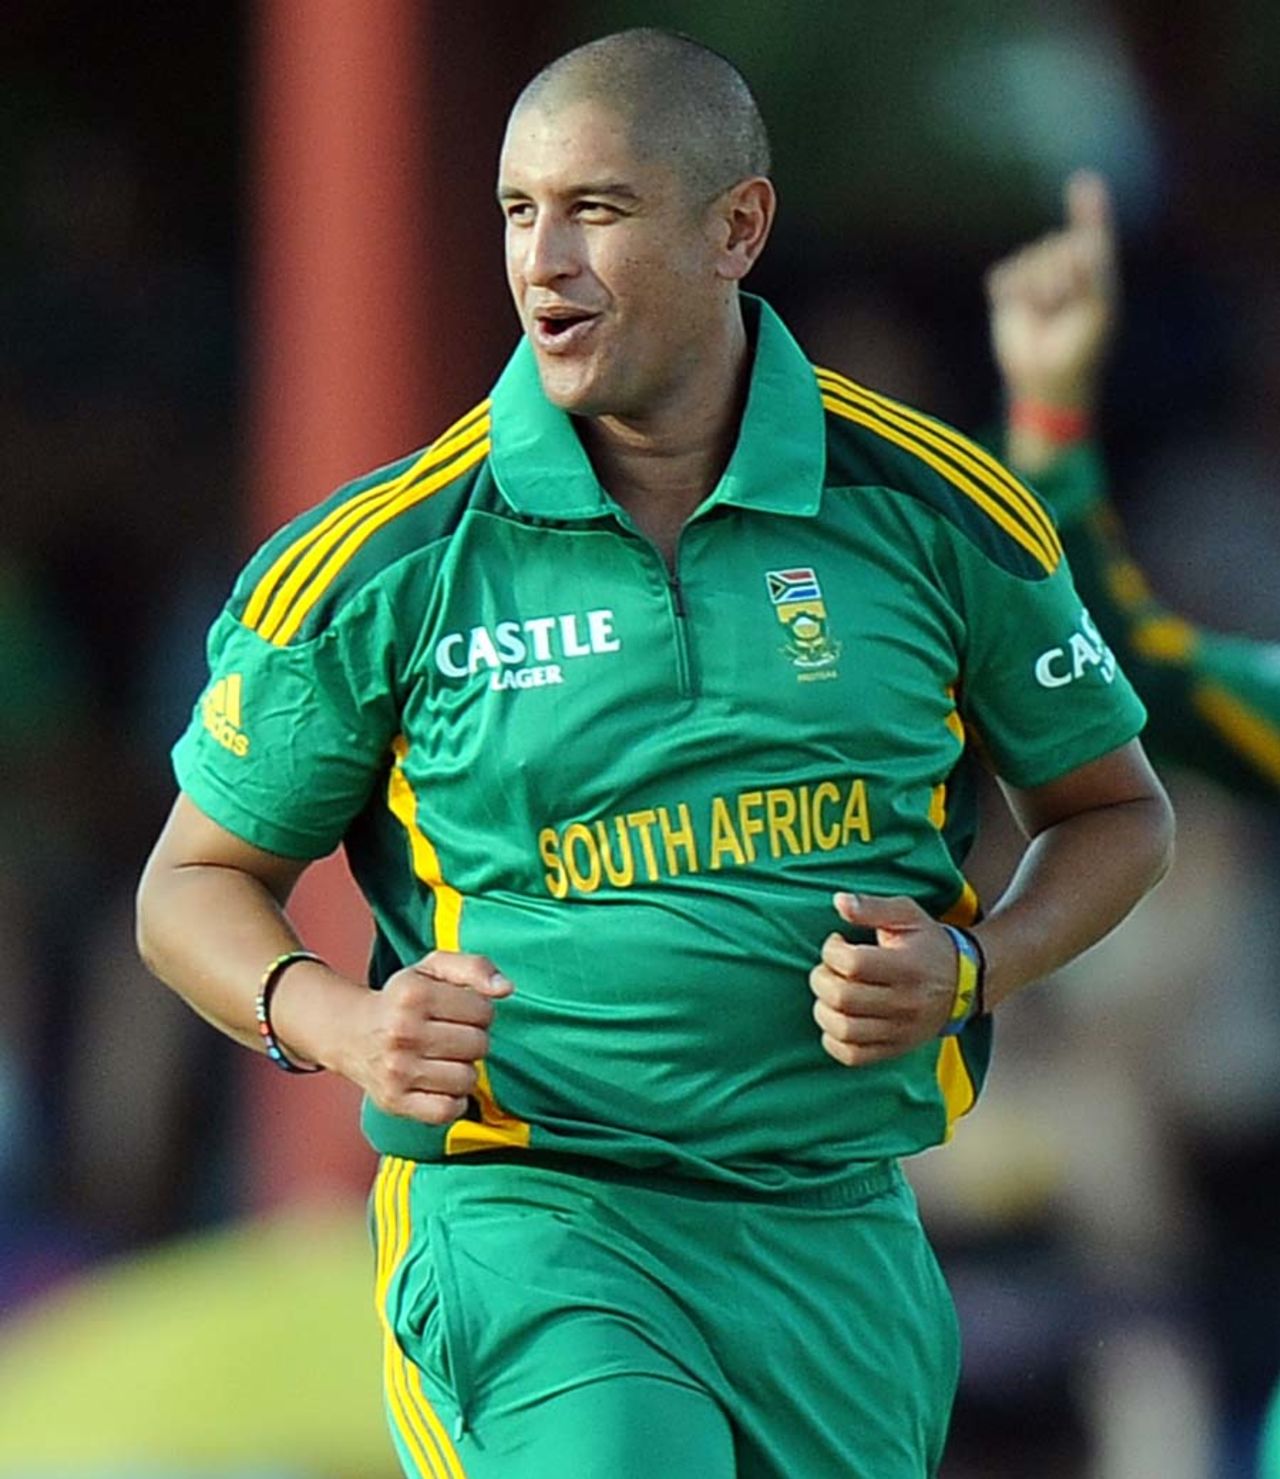 Rory Kleinveldt took four wickets to help bowl Pakistan out quickly, South Africa v Pakistan, 1st ODI, Bloemfontein, March 10, 2013